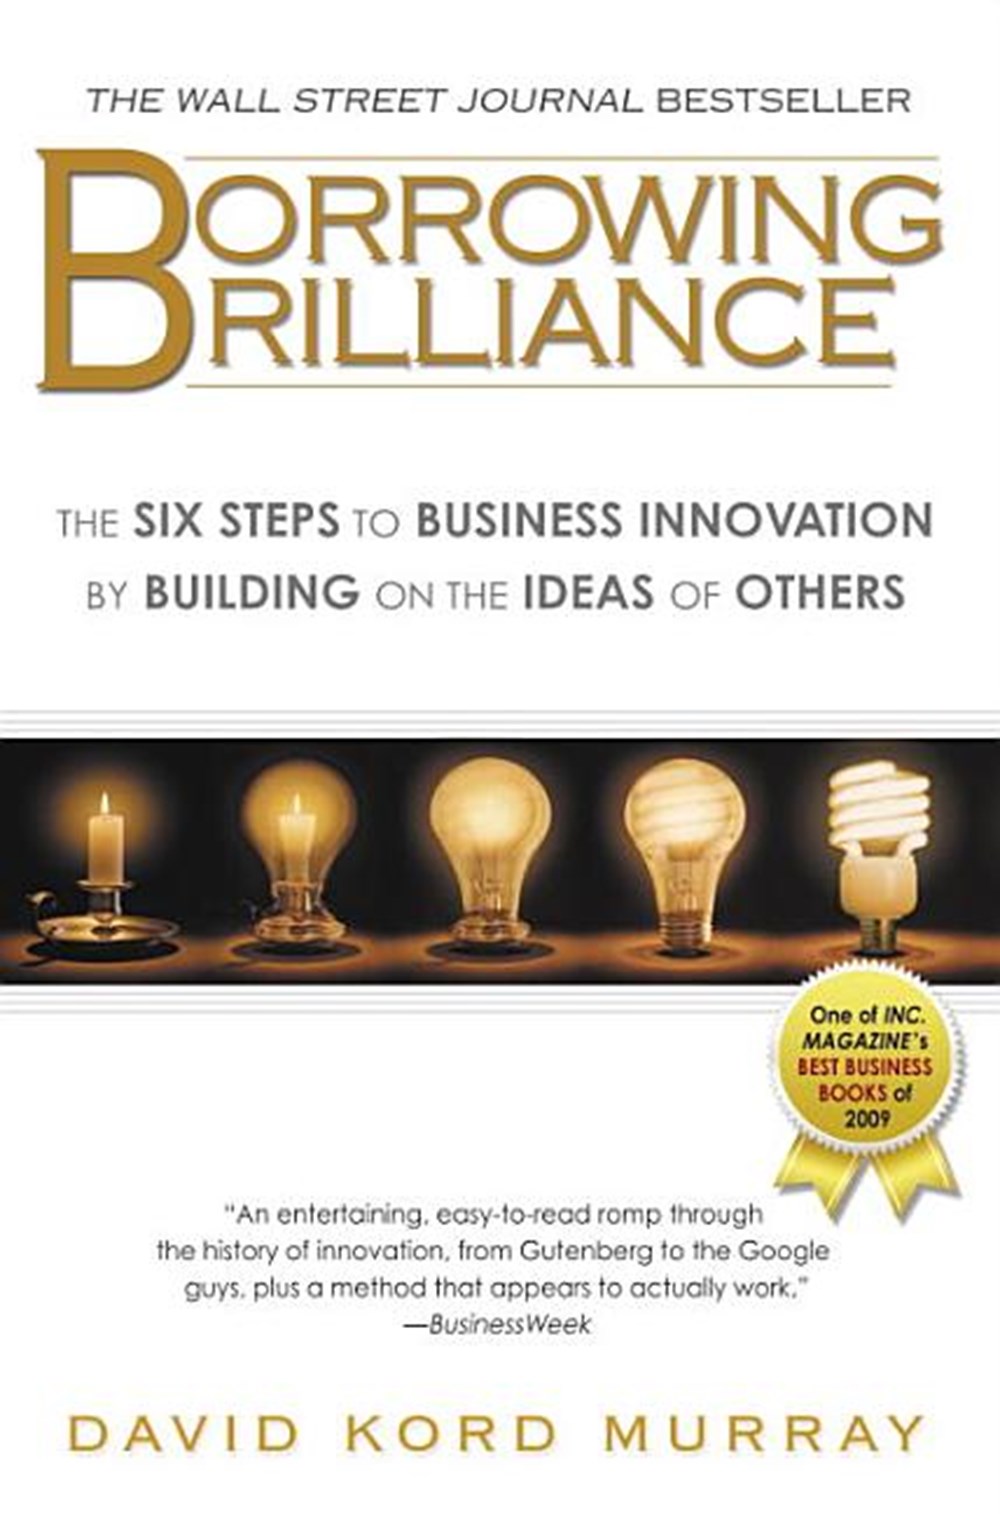 Borrowing Brilliance The Six Steps to Business Innovation by Building on the Ideas of Others